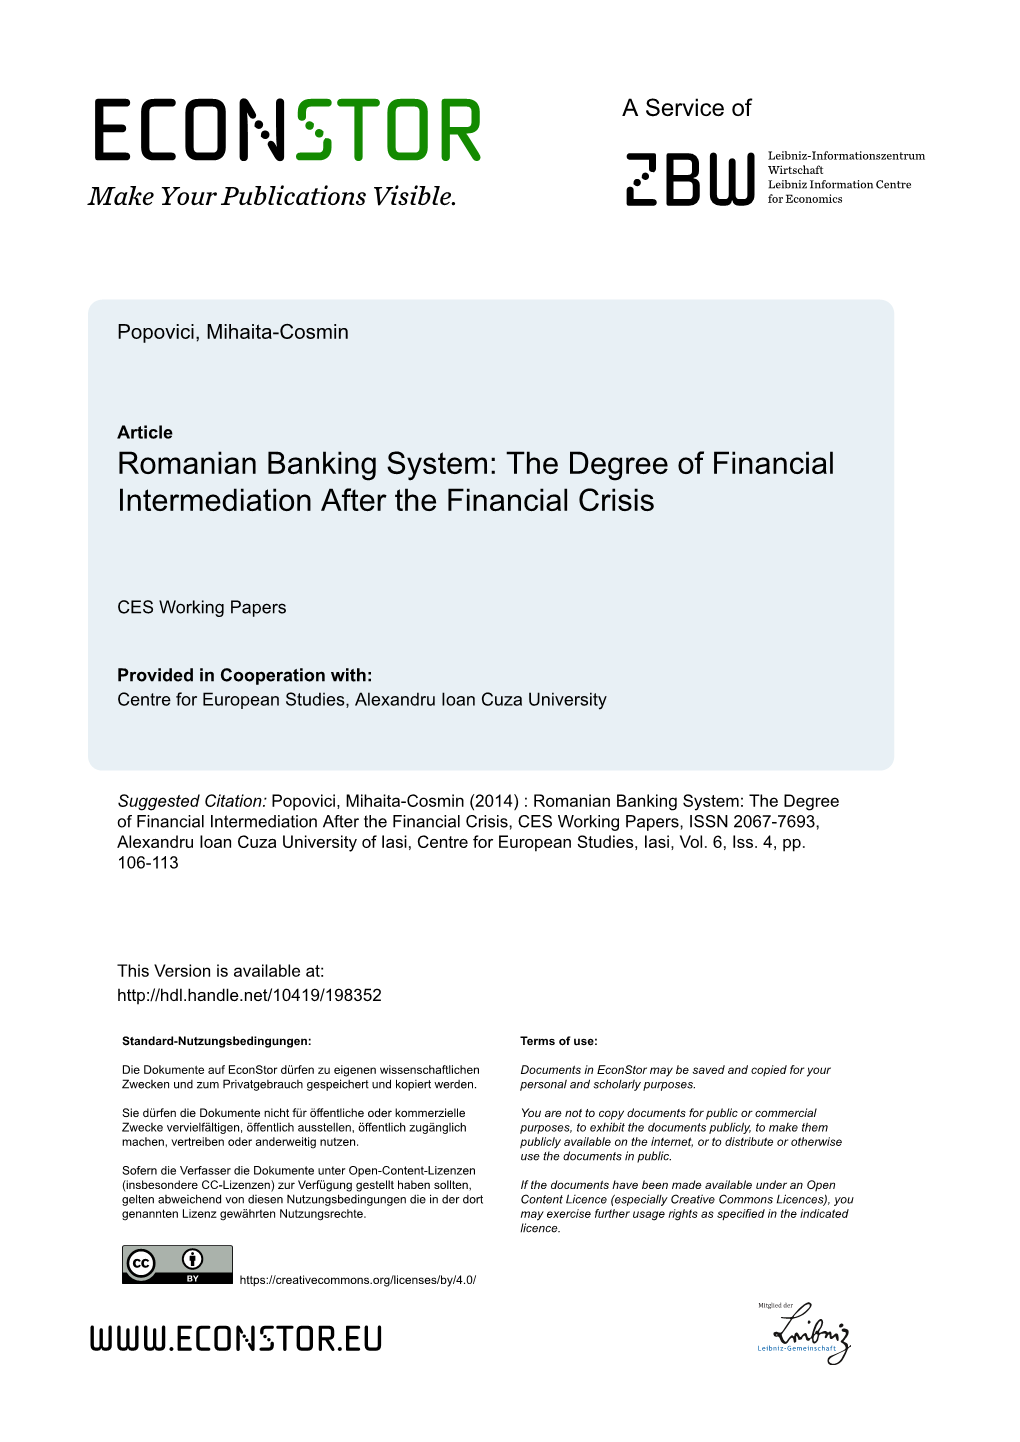 Romanian Banking System: the Degree of Financial Intermediation After the Financial Crisis